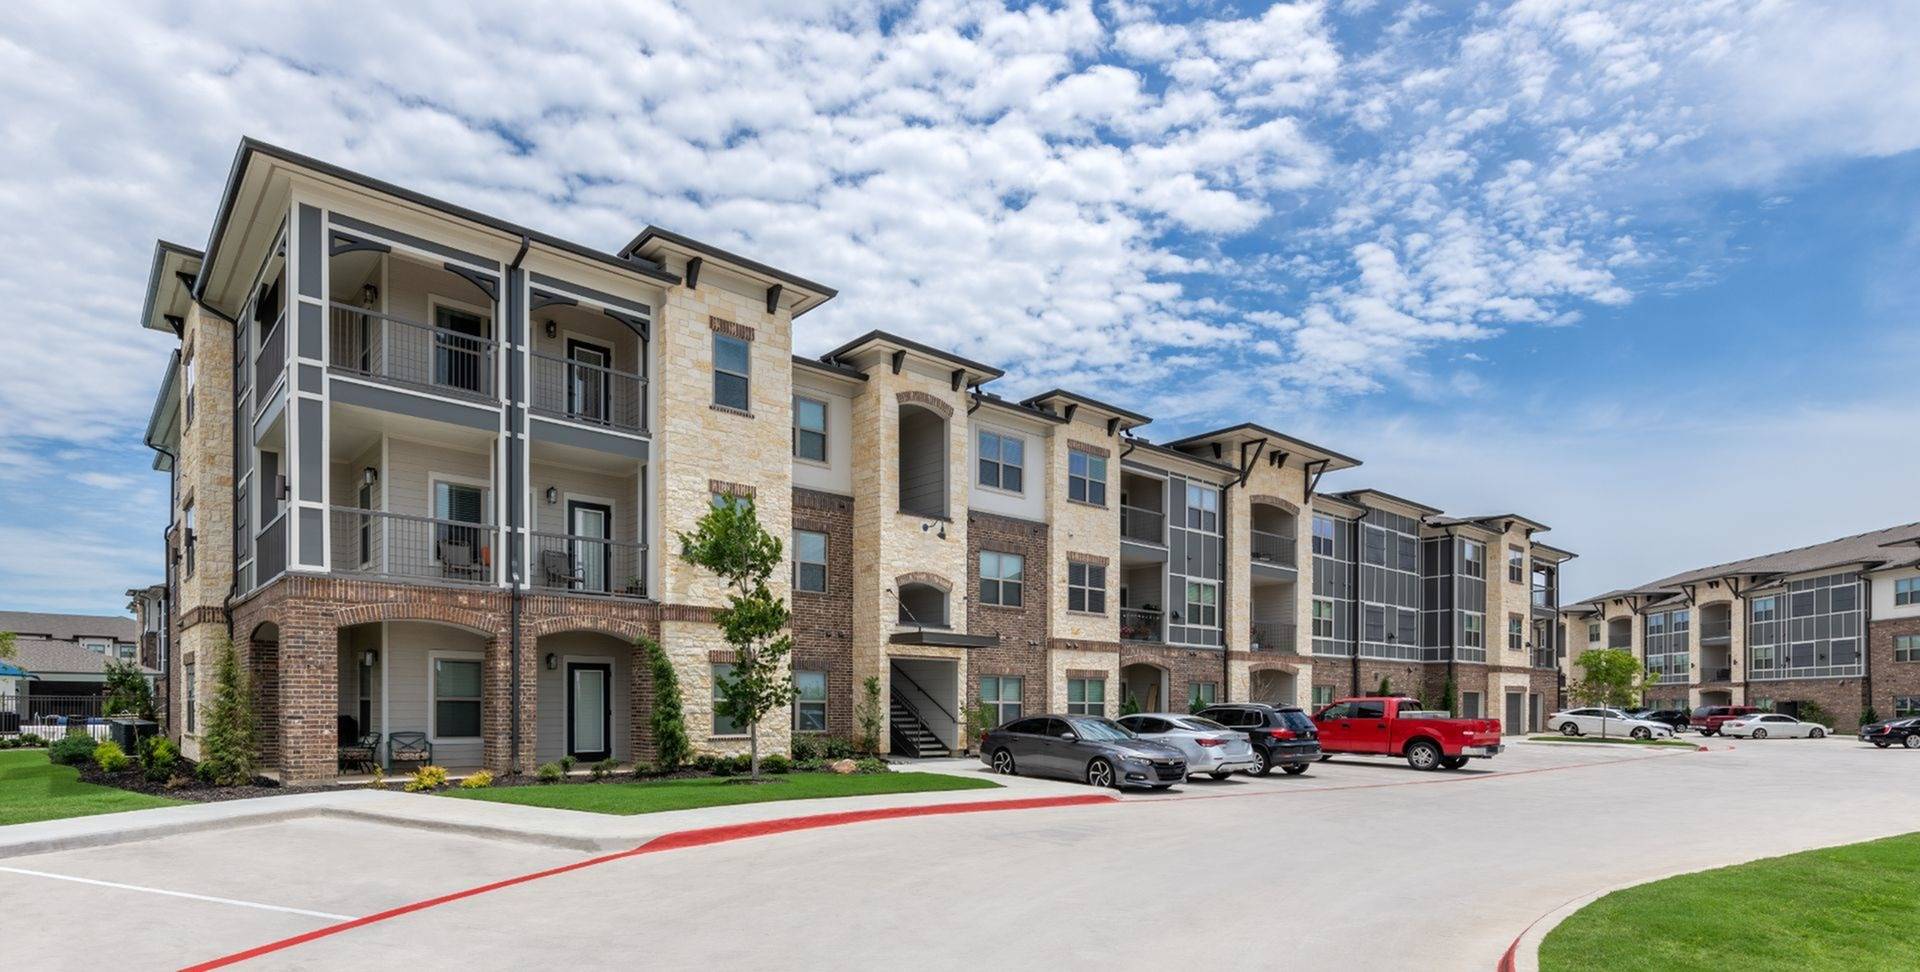 Apartments Exterior and Parking Lot | Apartments in Fort Worth, TX | Alleia at Presidio